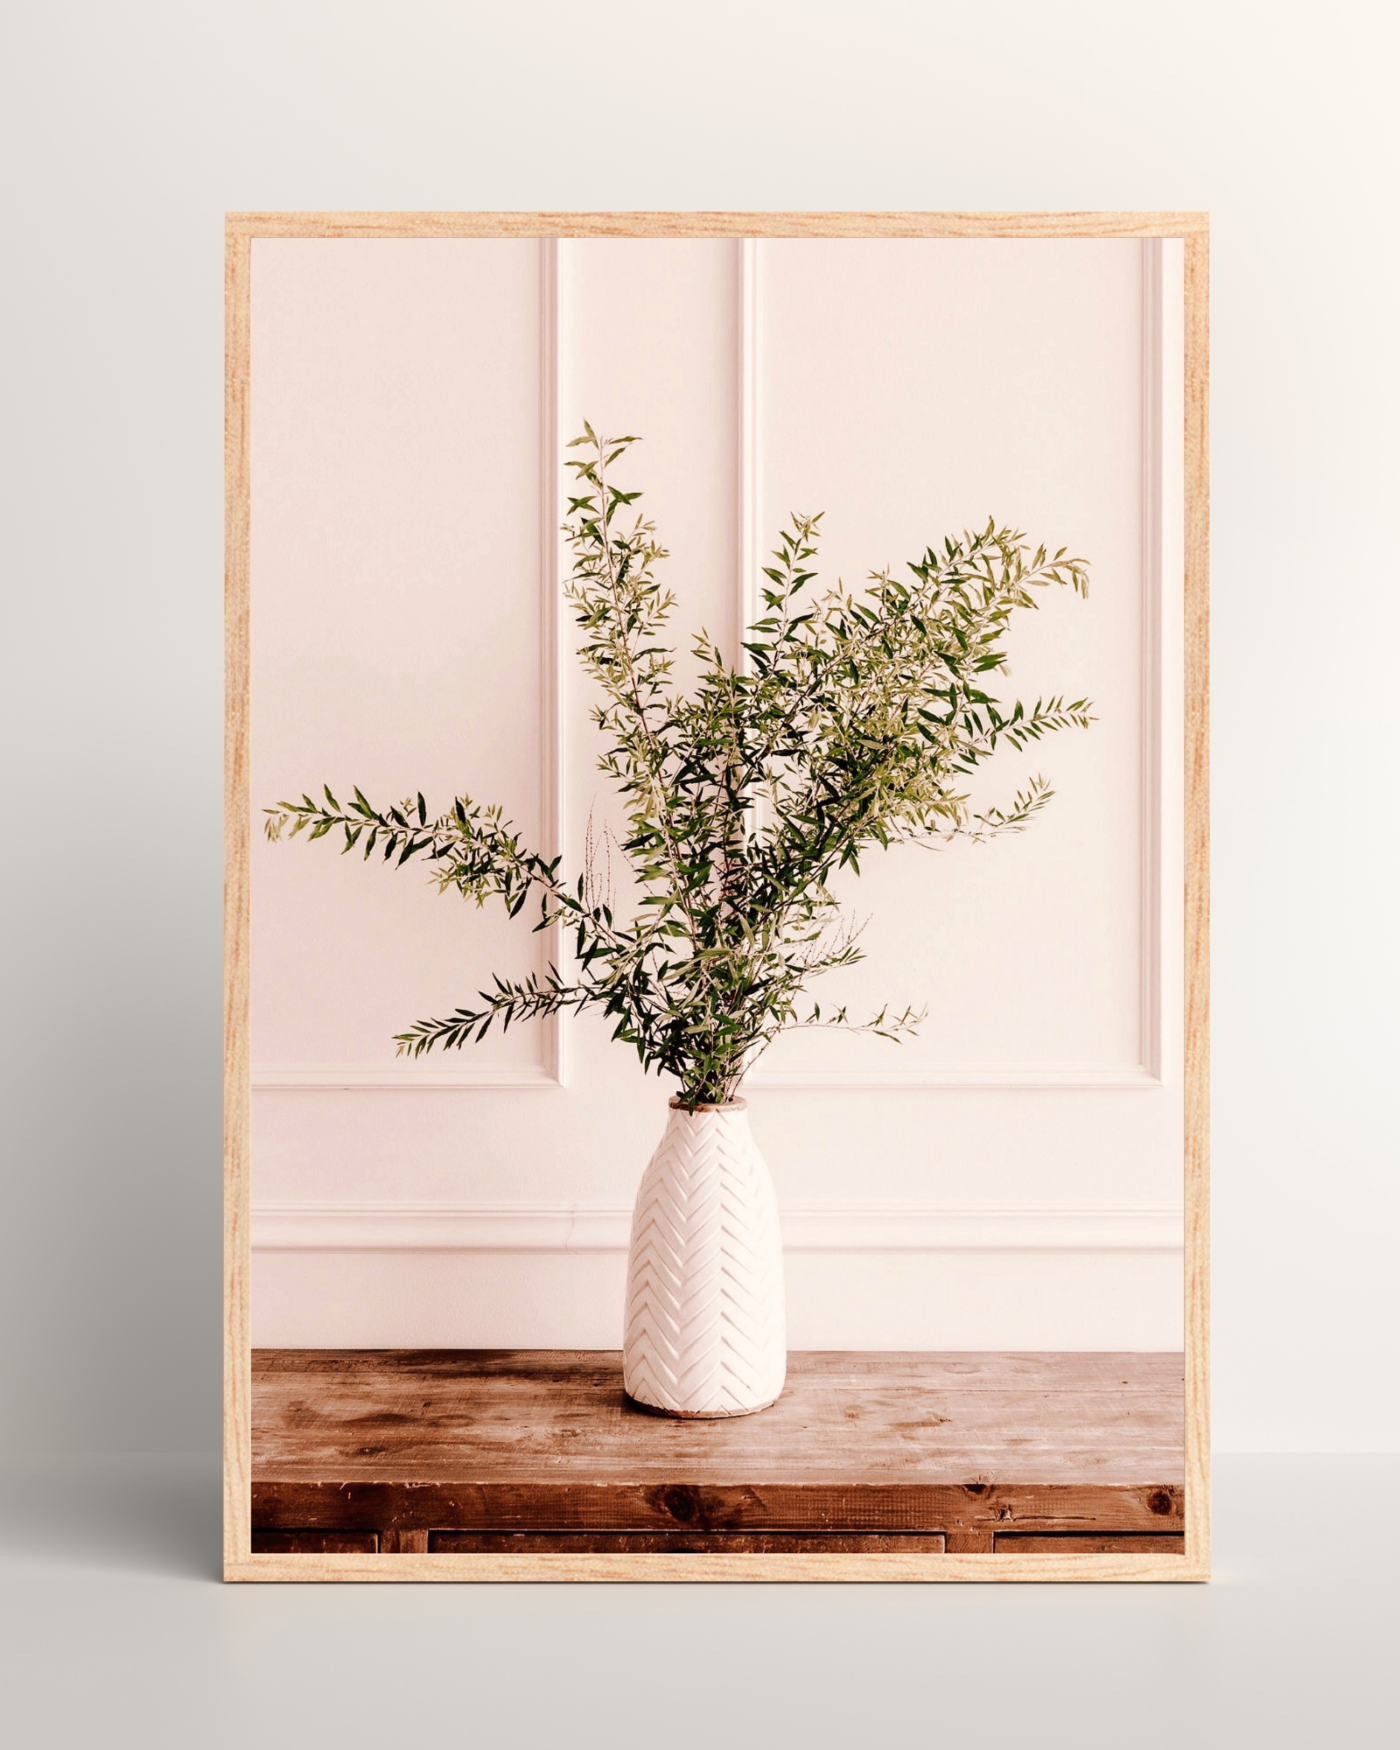 Greenery on Wooden Table Mockup3